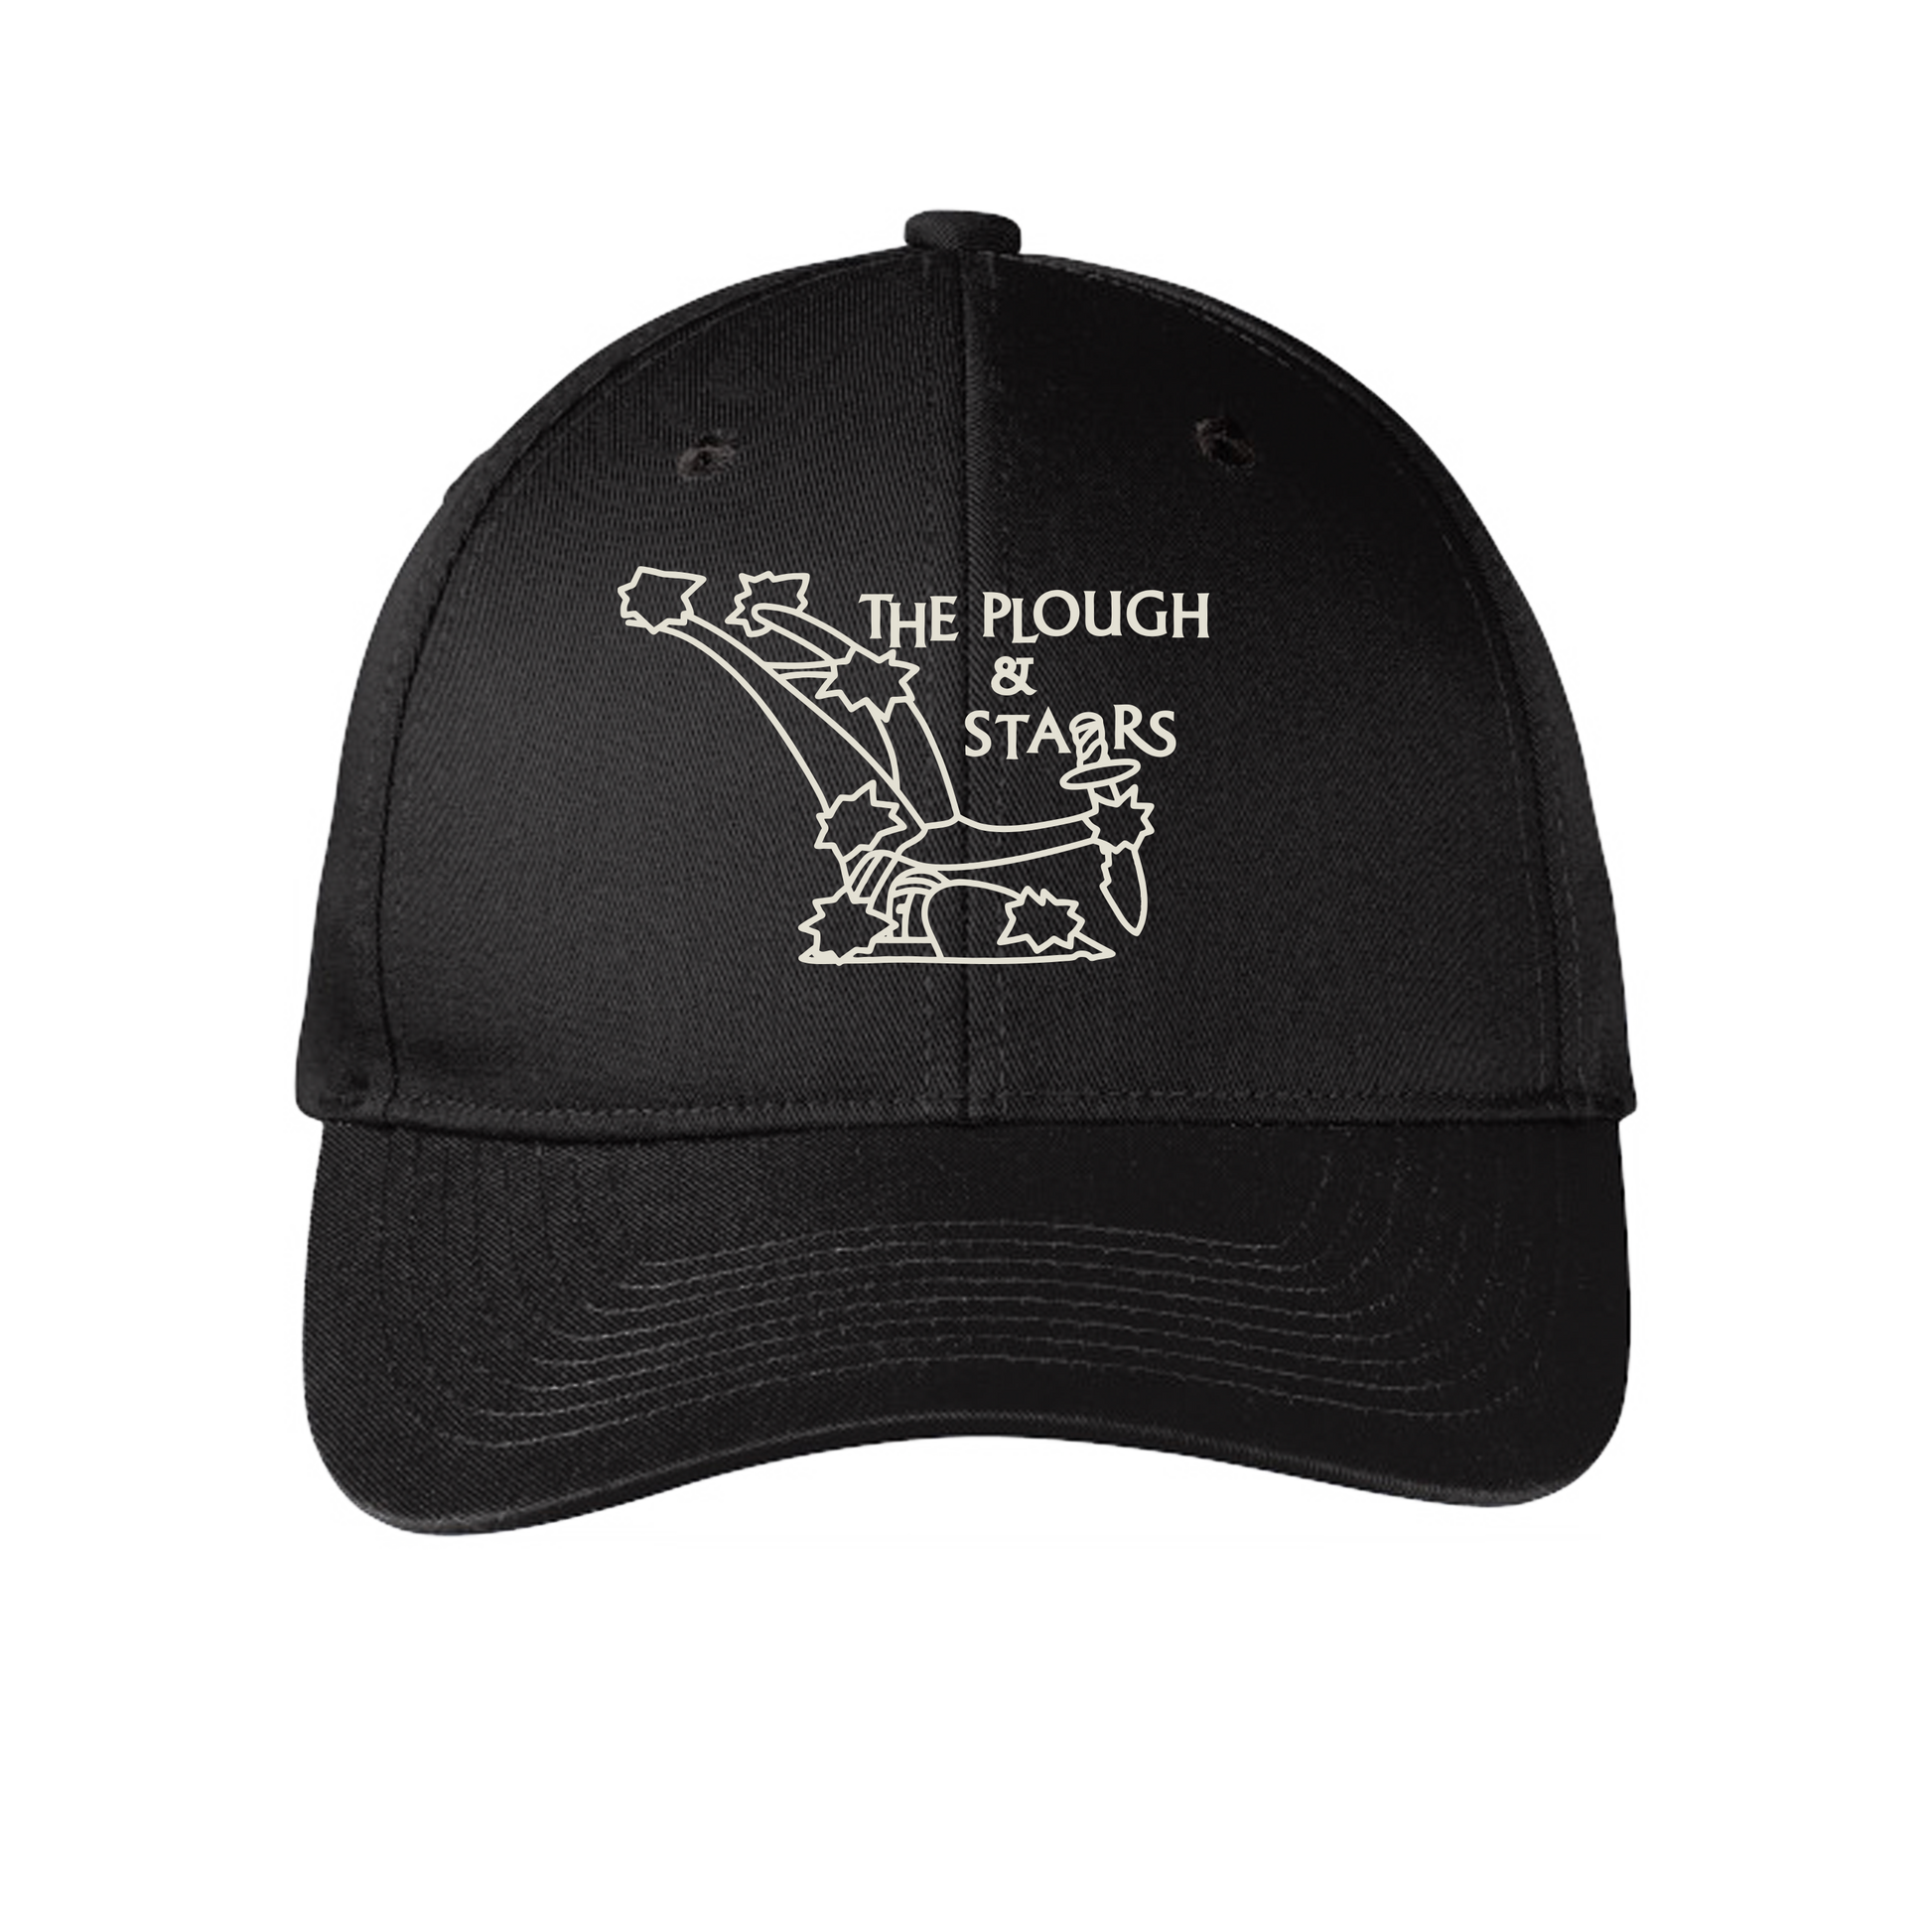 Black 6-panel baseball cap embroidered with the logo of The Plough and Stars in Cambridge, MA